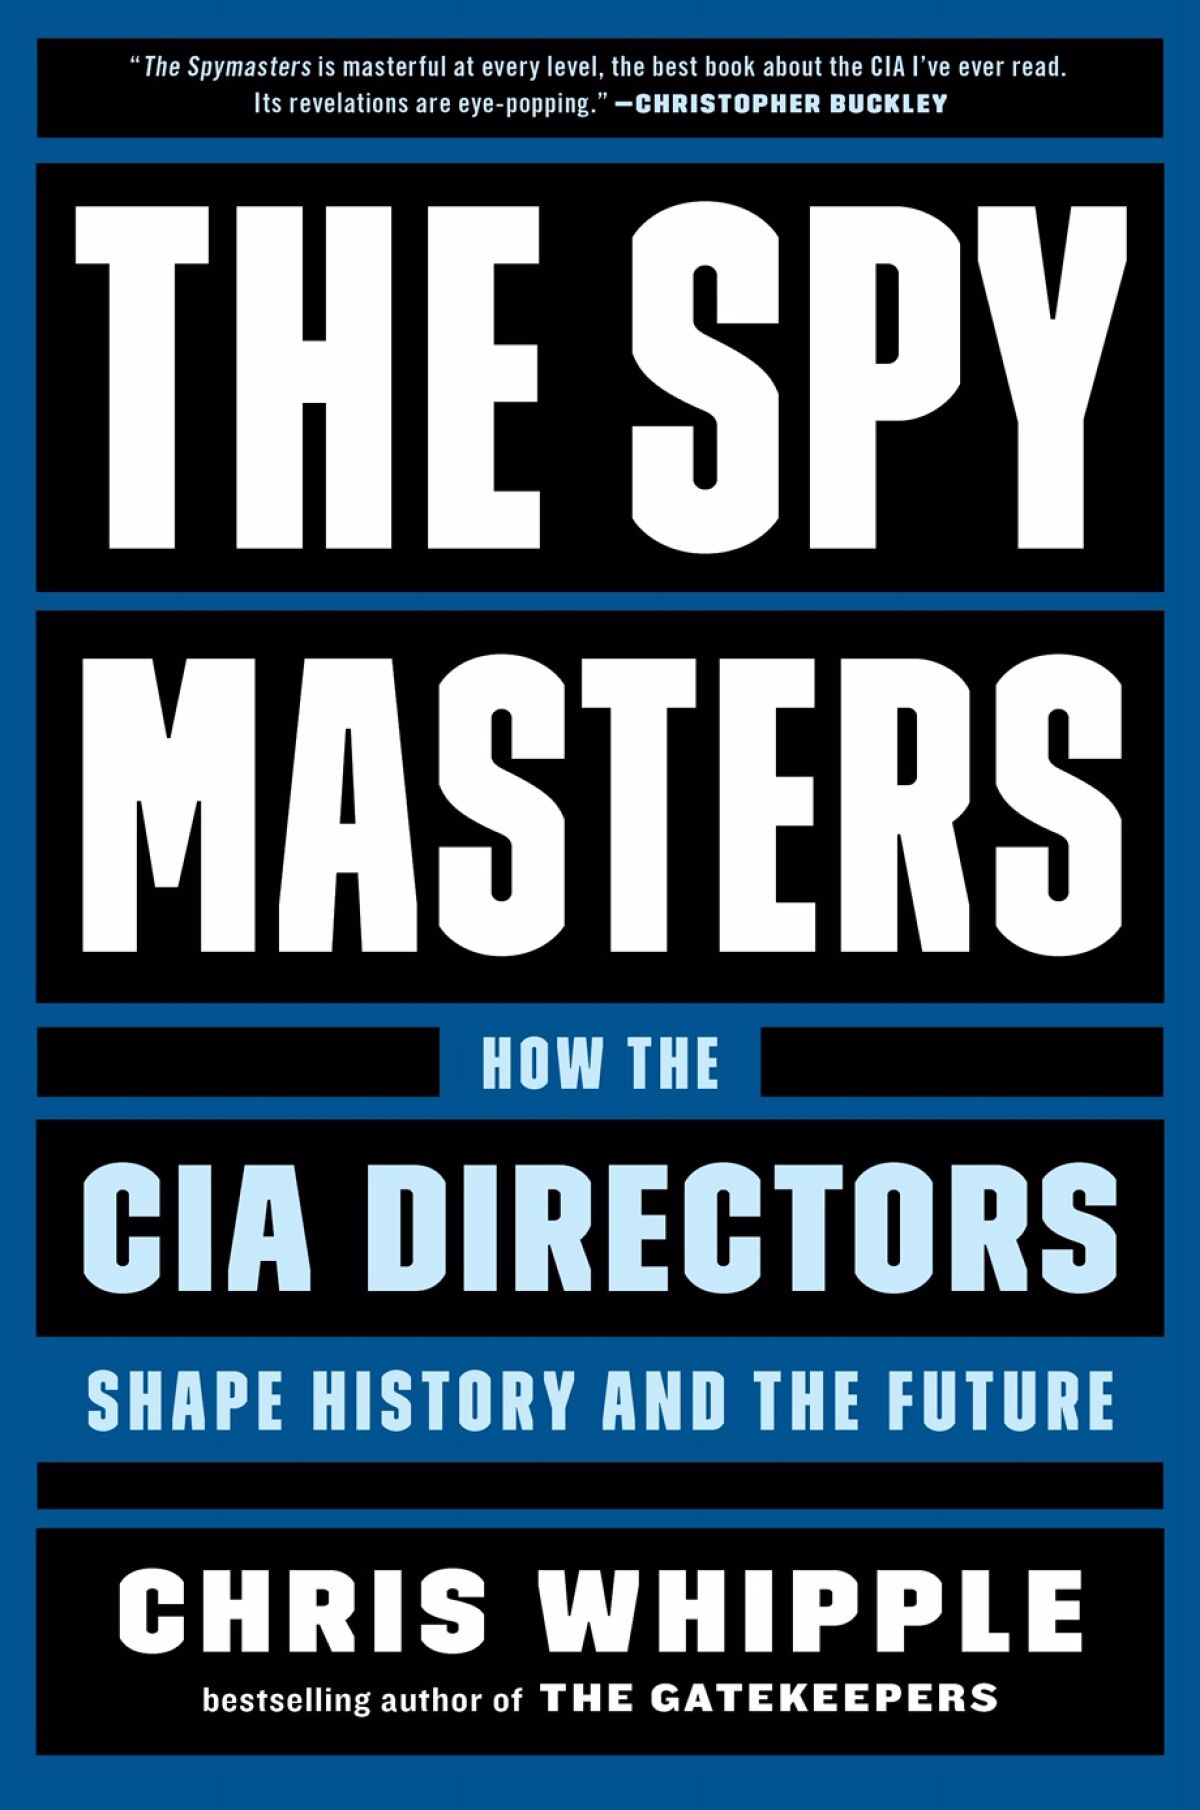 "The Spymasters: How the CIA Directors Shape History and the Future" book jacket by Chris Whipple.